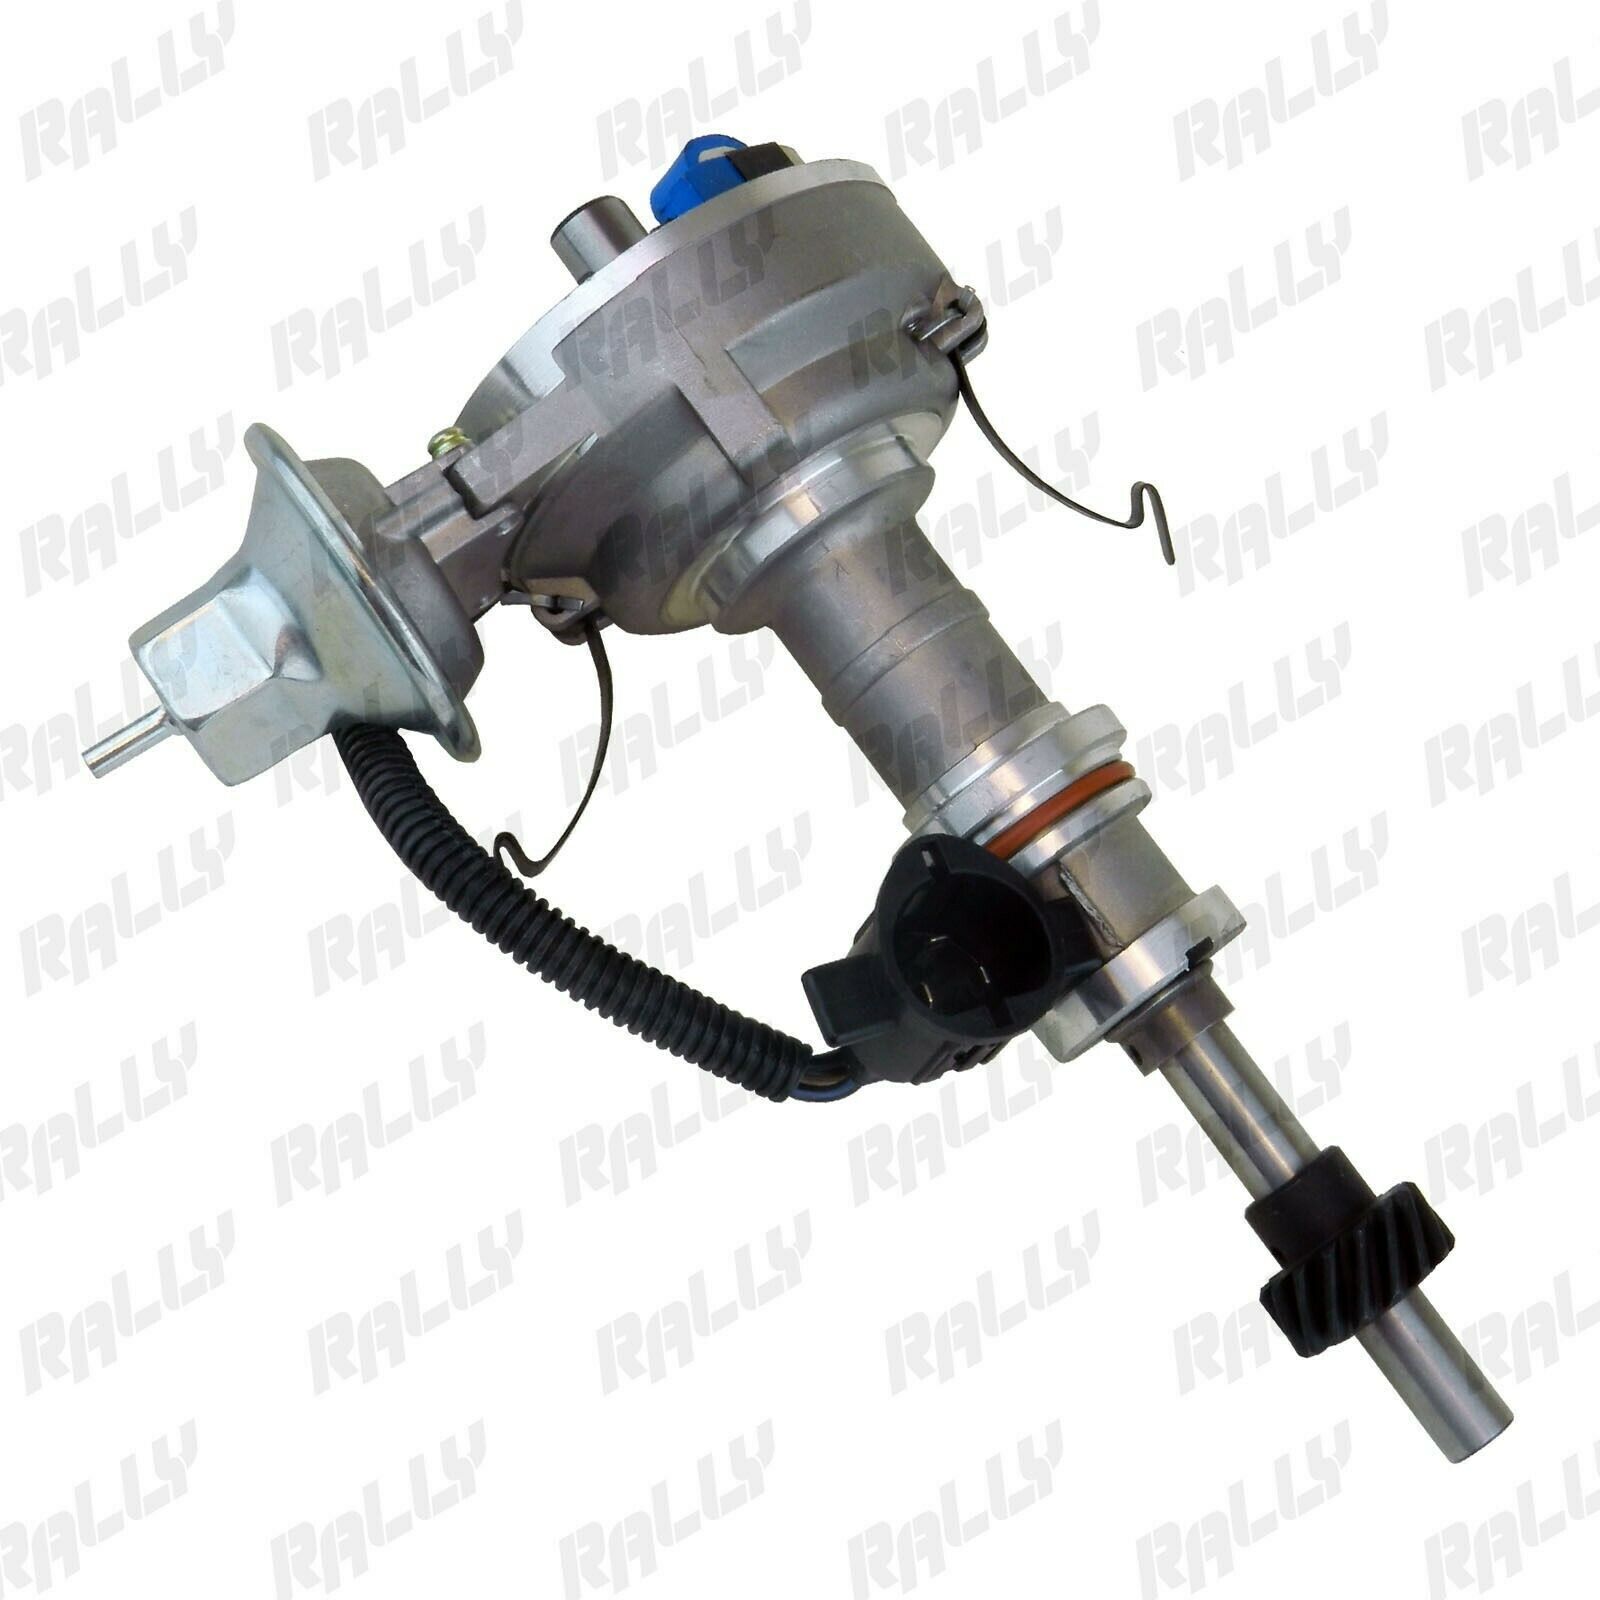 (5) Five Ignition Distributor Ford 351W Carburated Bronco F-150 F-350 5.8L 1974-91 (369)